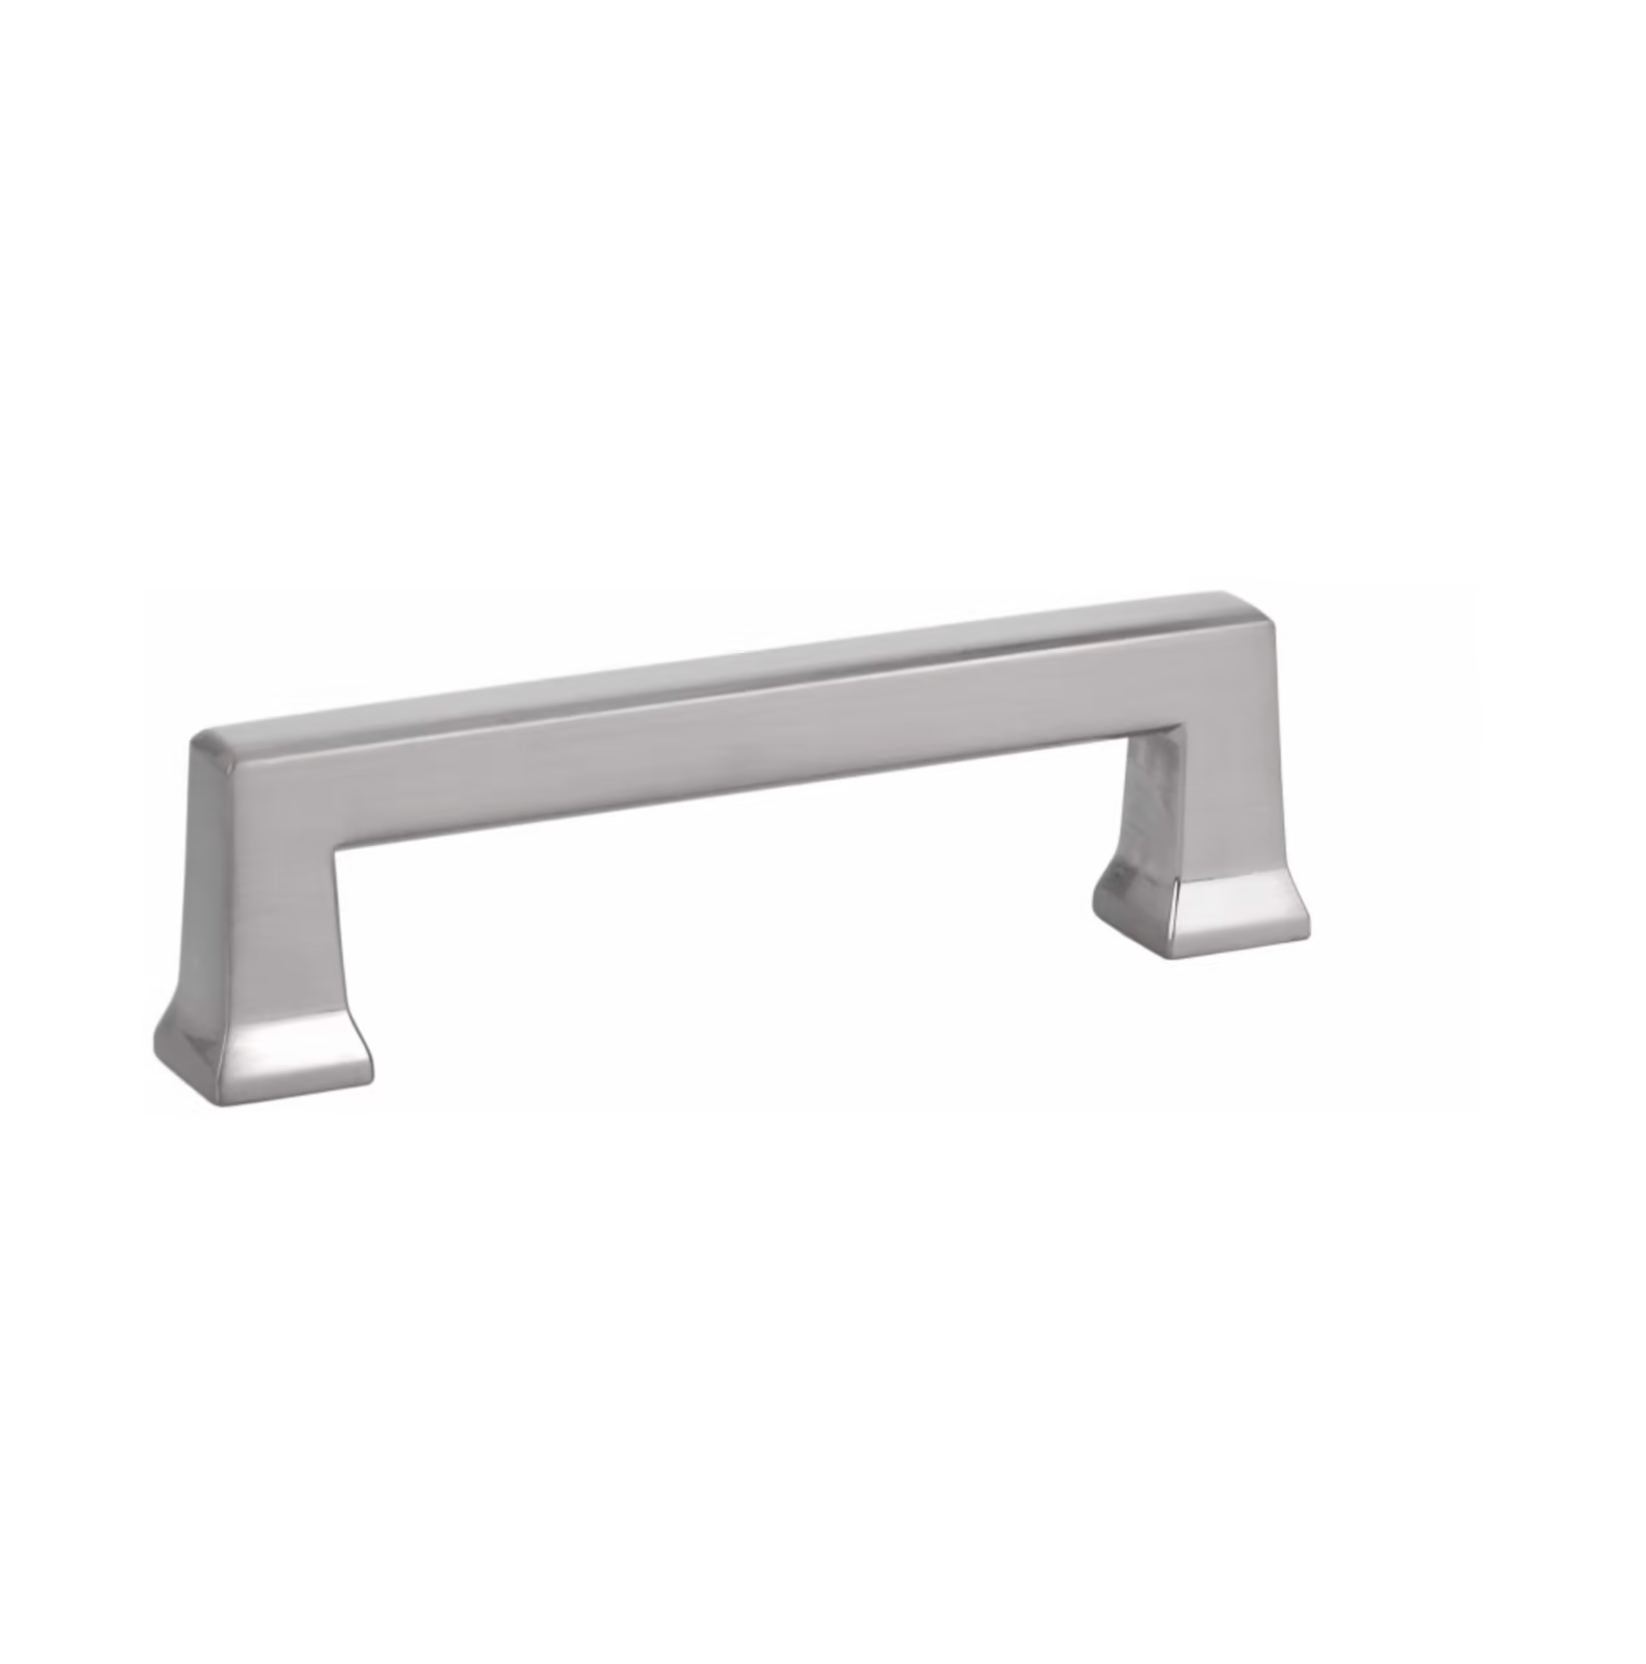 Satin Nickel "Deco" Cabinet Knobs and Drawer Pulls - Forge Hardware Studio